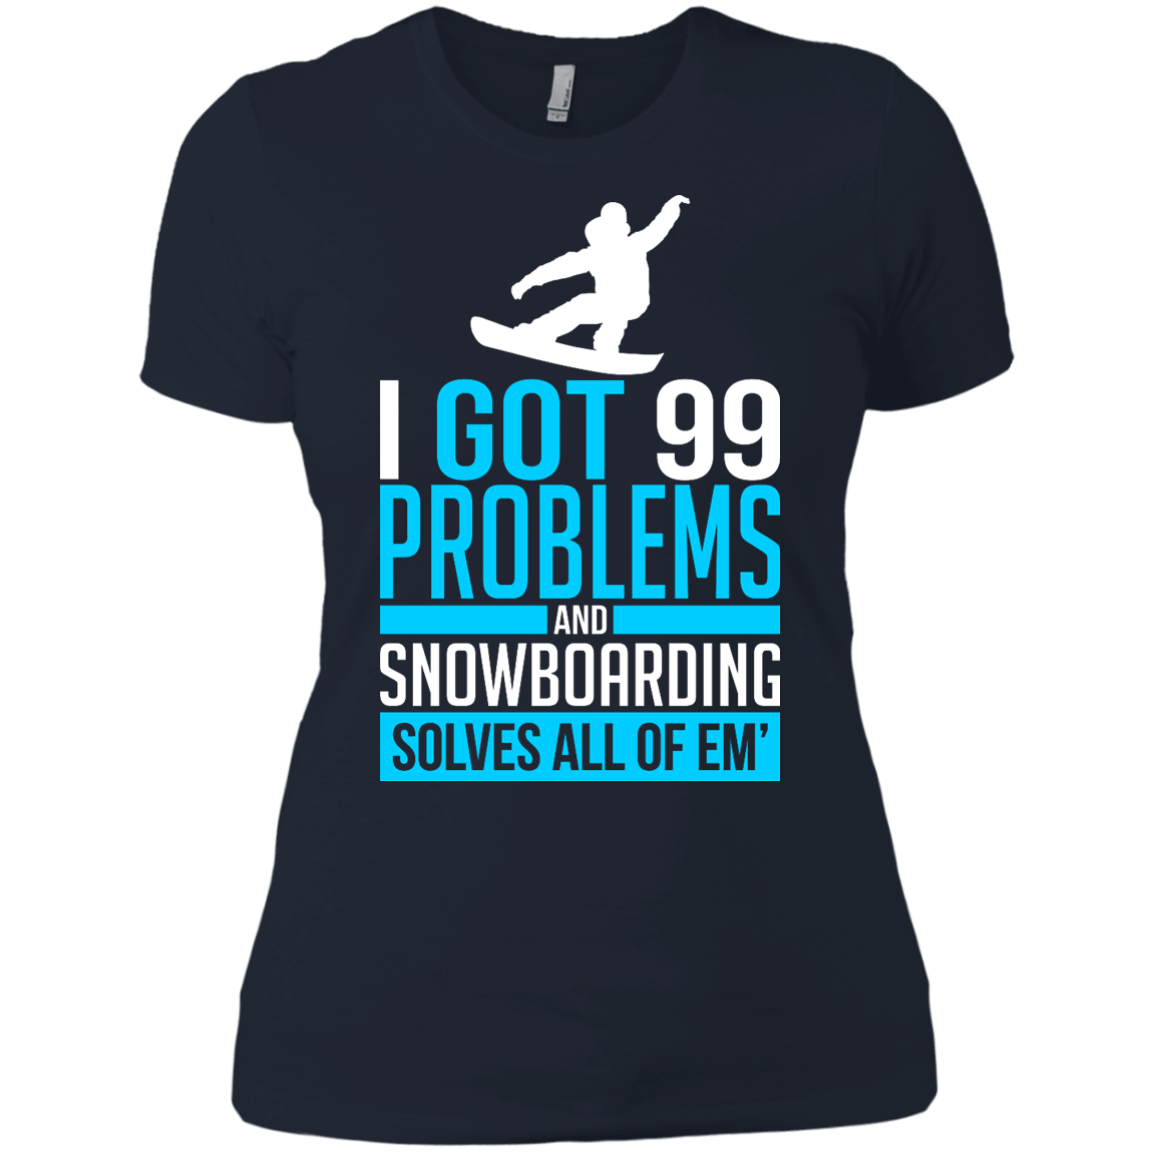 I Got 99 Problems And Snowboarding Solves All Of Em Ladies Tees - Powderaddicts